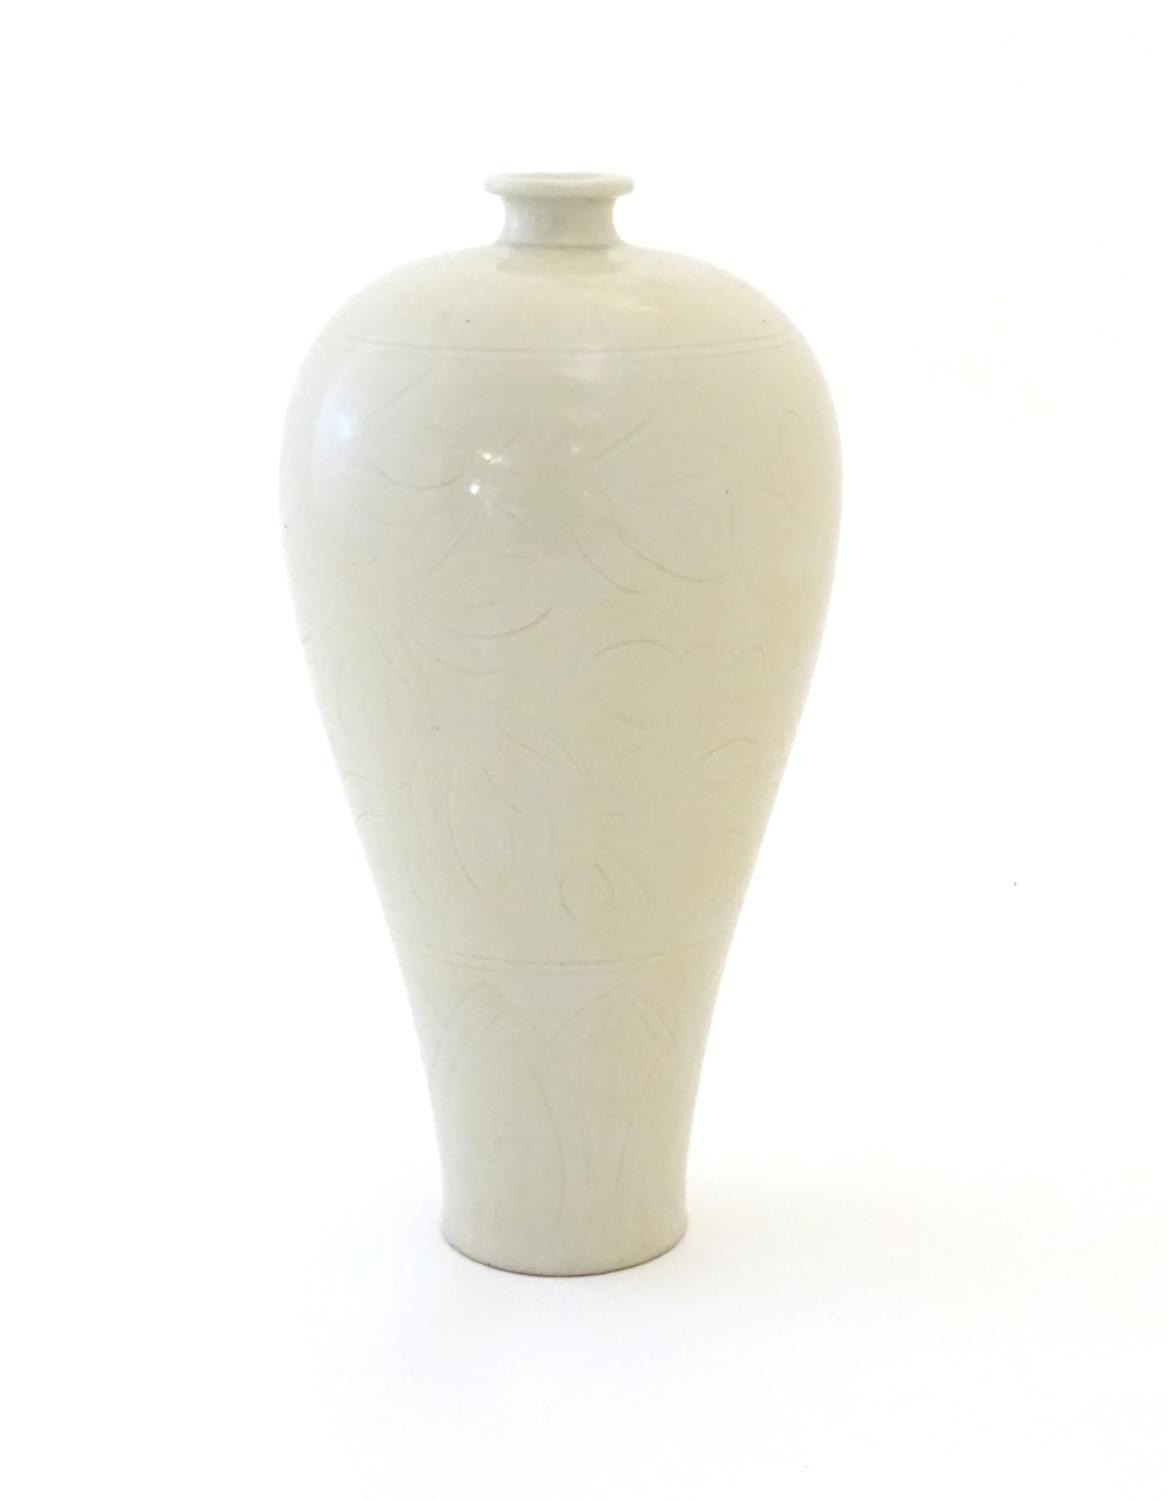 A Korean slender baluster vase with incised stylised floral and foliate detail. Approx. 11 1/2" high